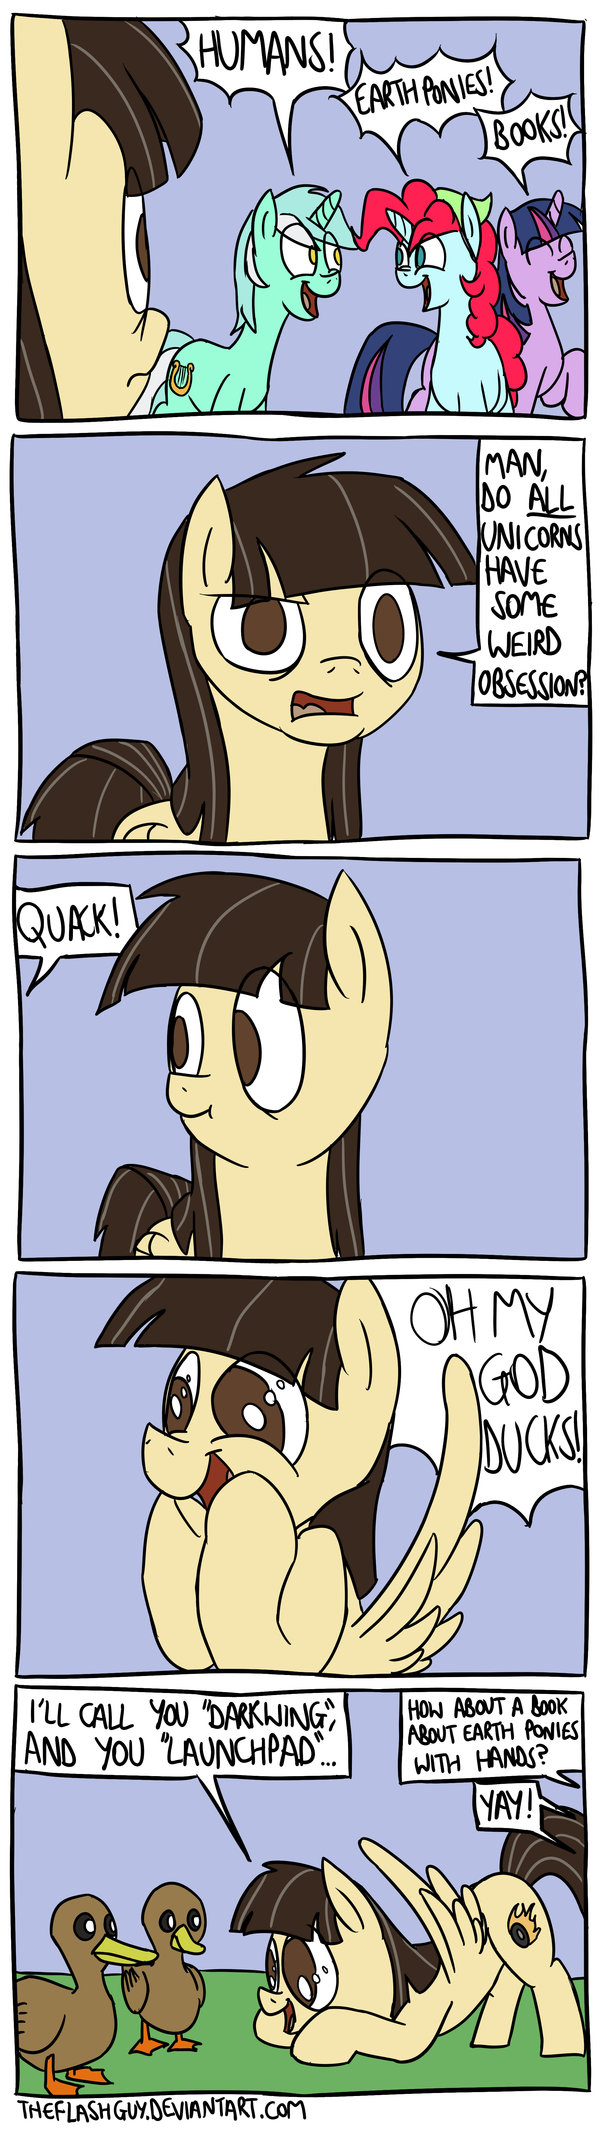 Obsessions - Not Just for Unicorns by timsplosion